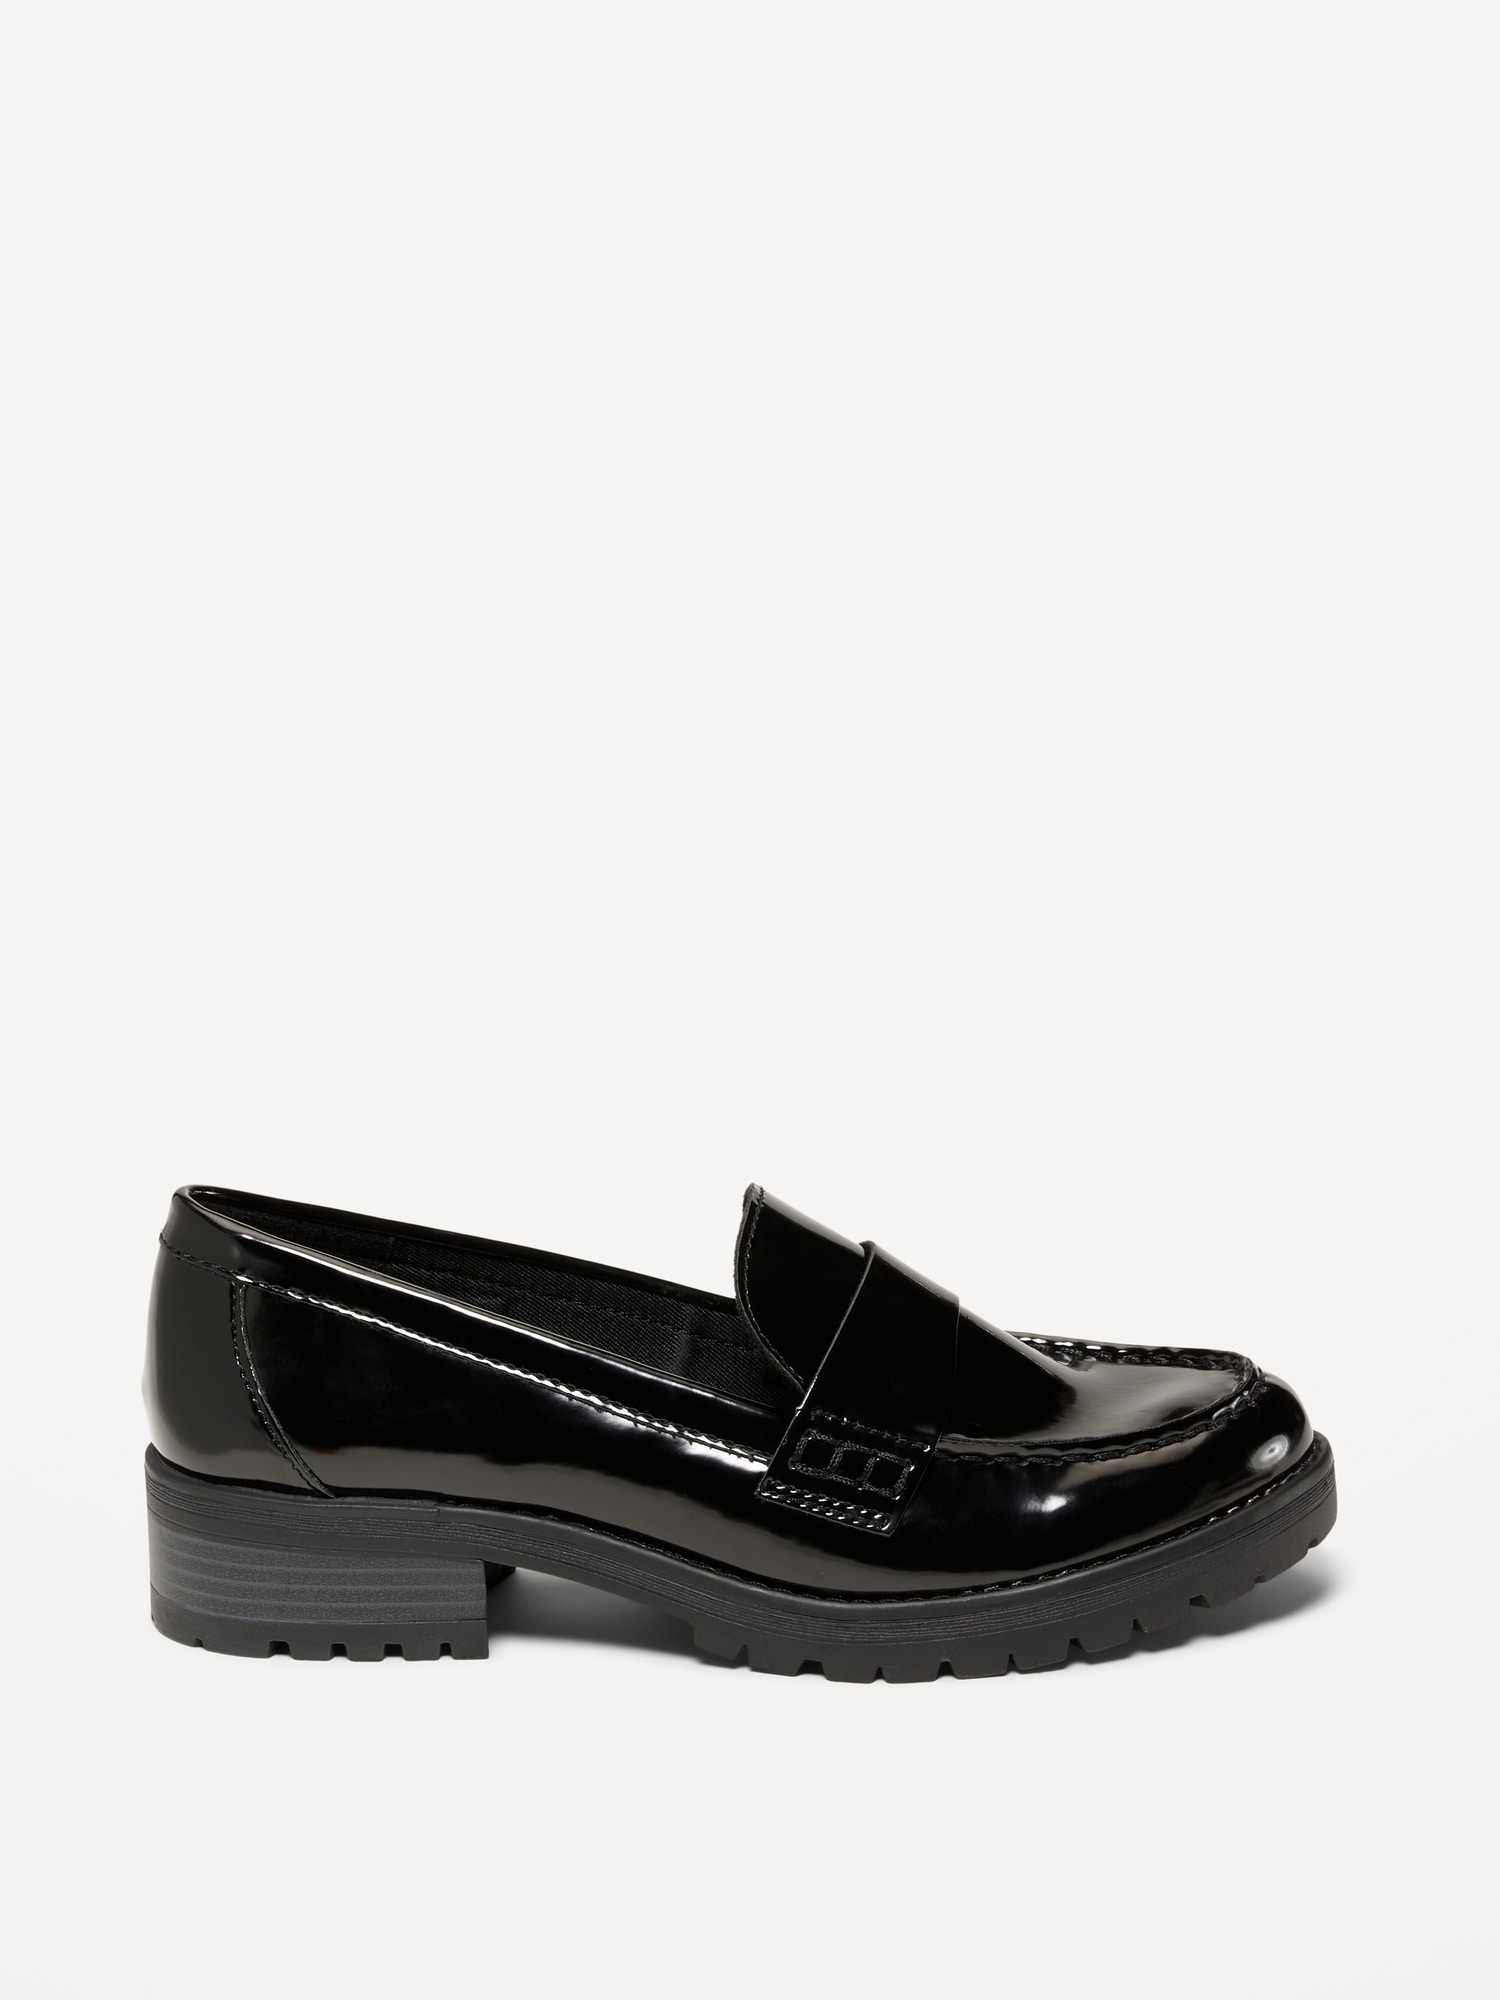 Faux-Leather Chunky-Heel Loafer Shoes for Women Old